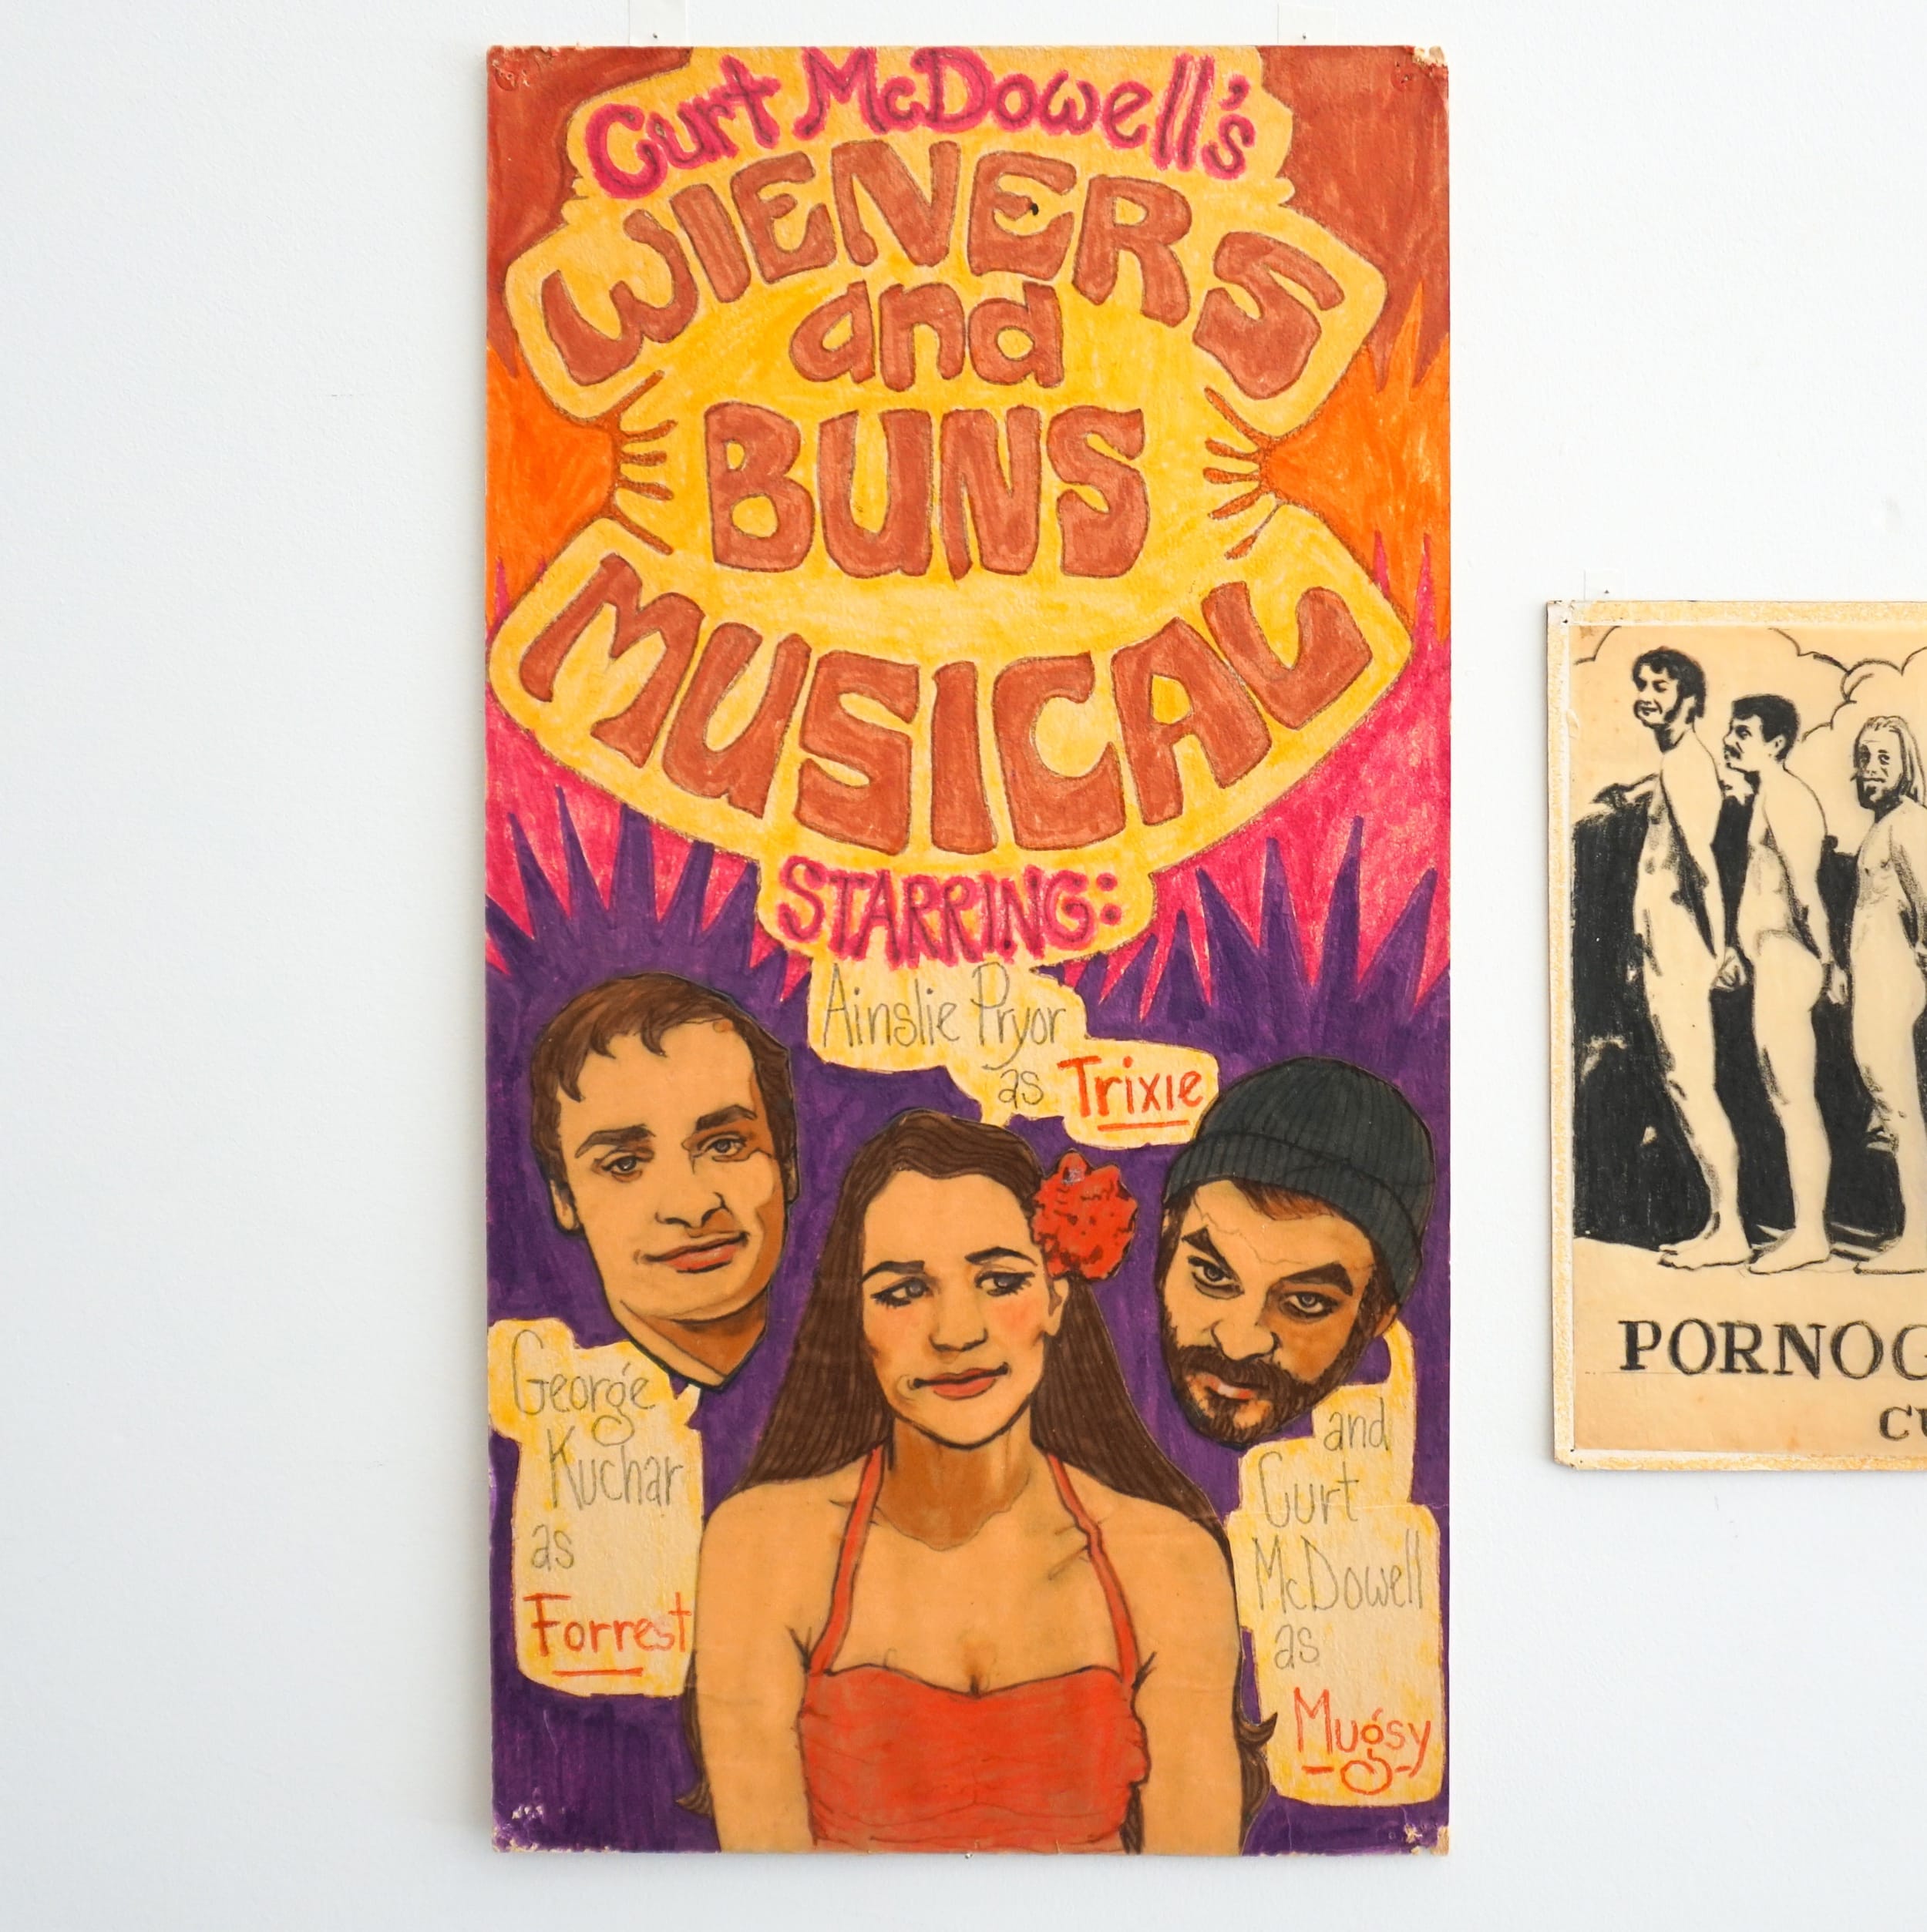  Curt McDowell  Wieners and Buns Musical (poster) , 1972 Mixed-media collage, velour 22 x 11.5 inches 